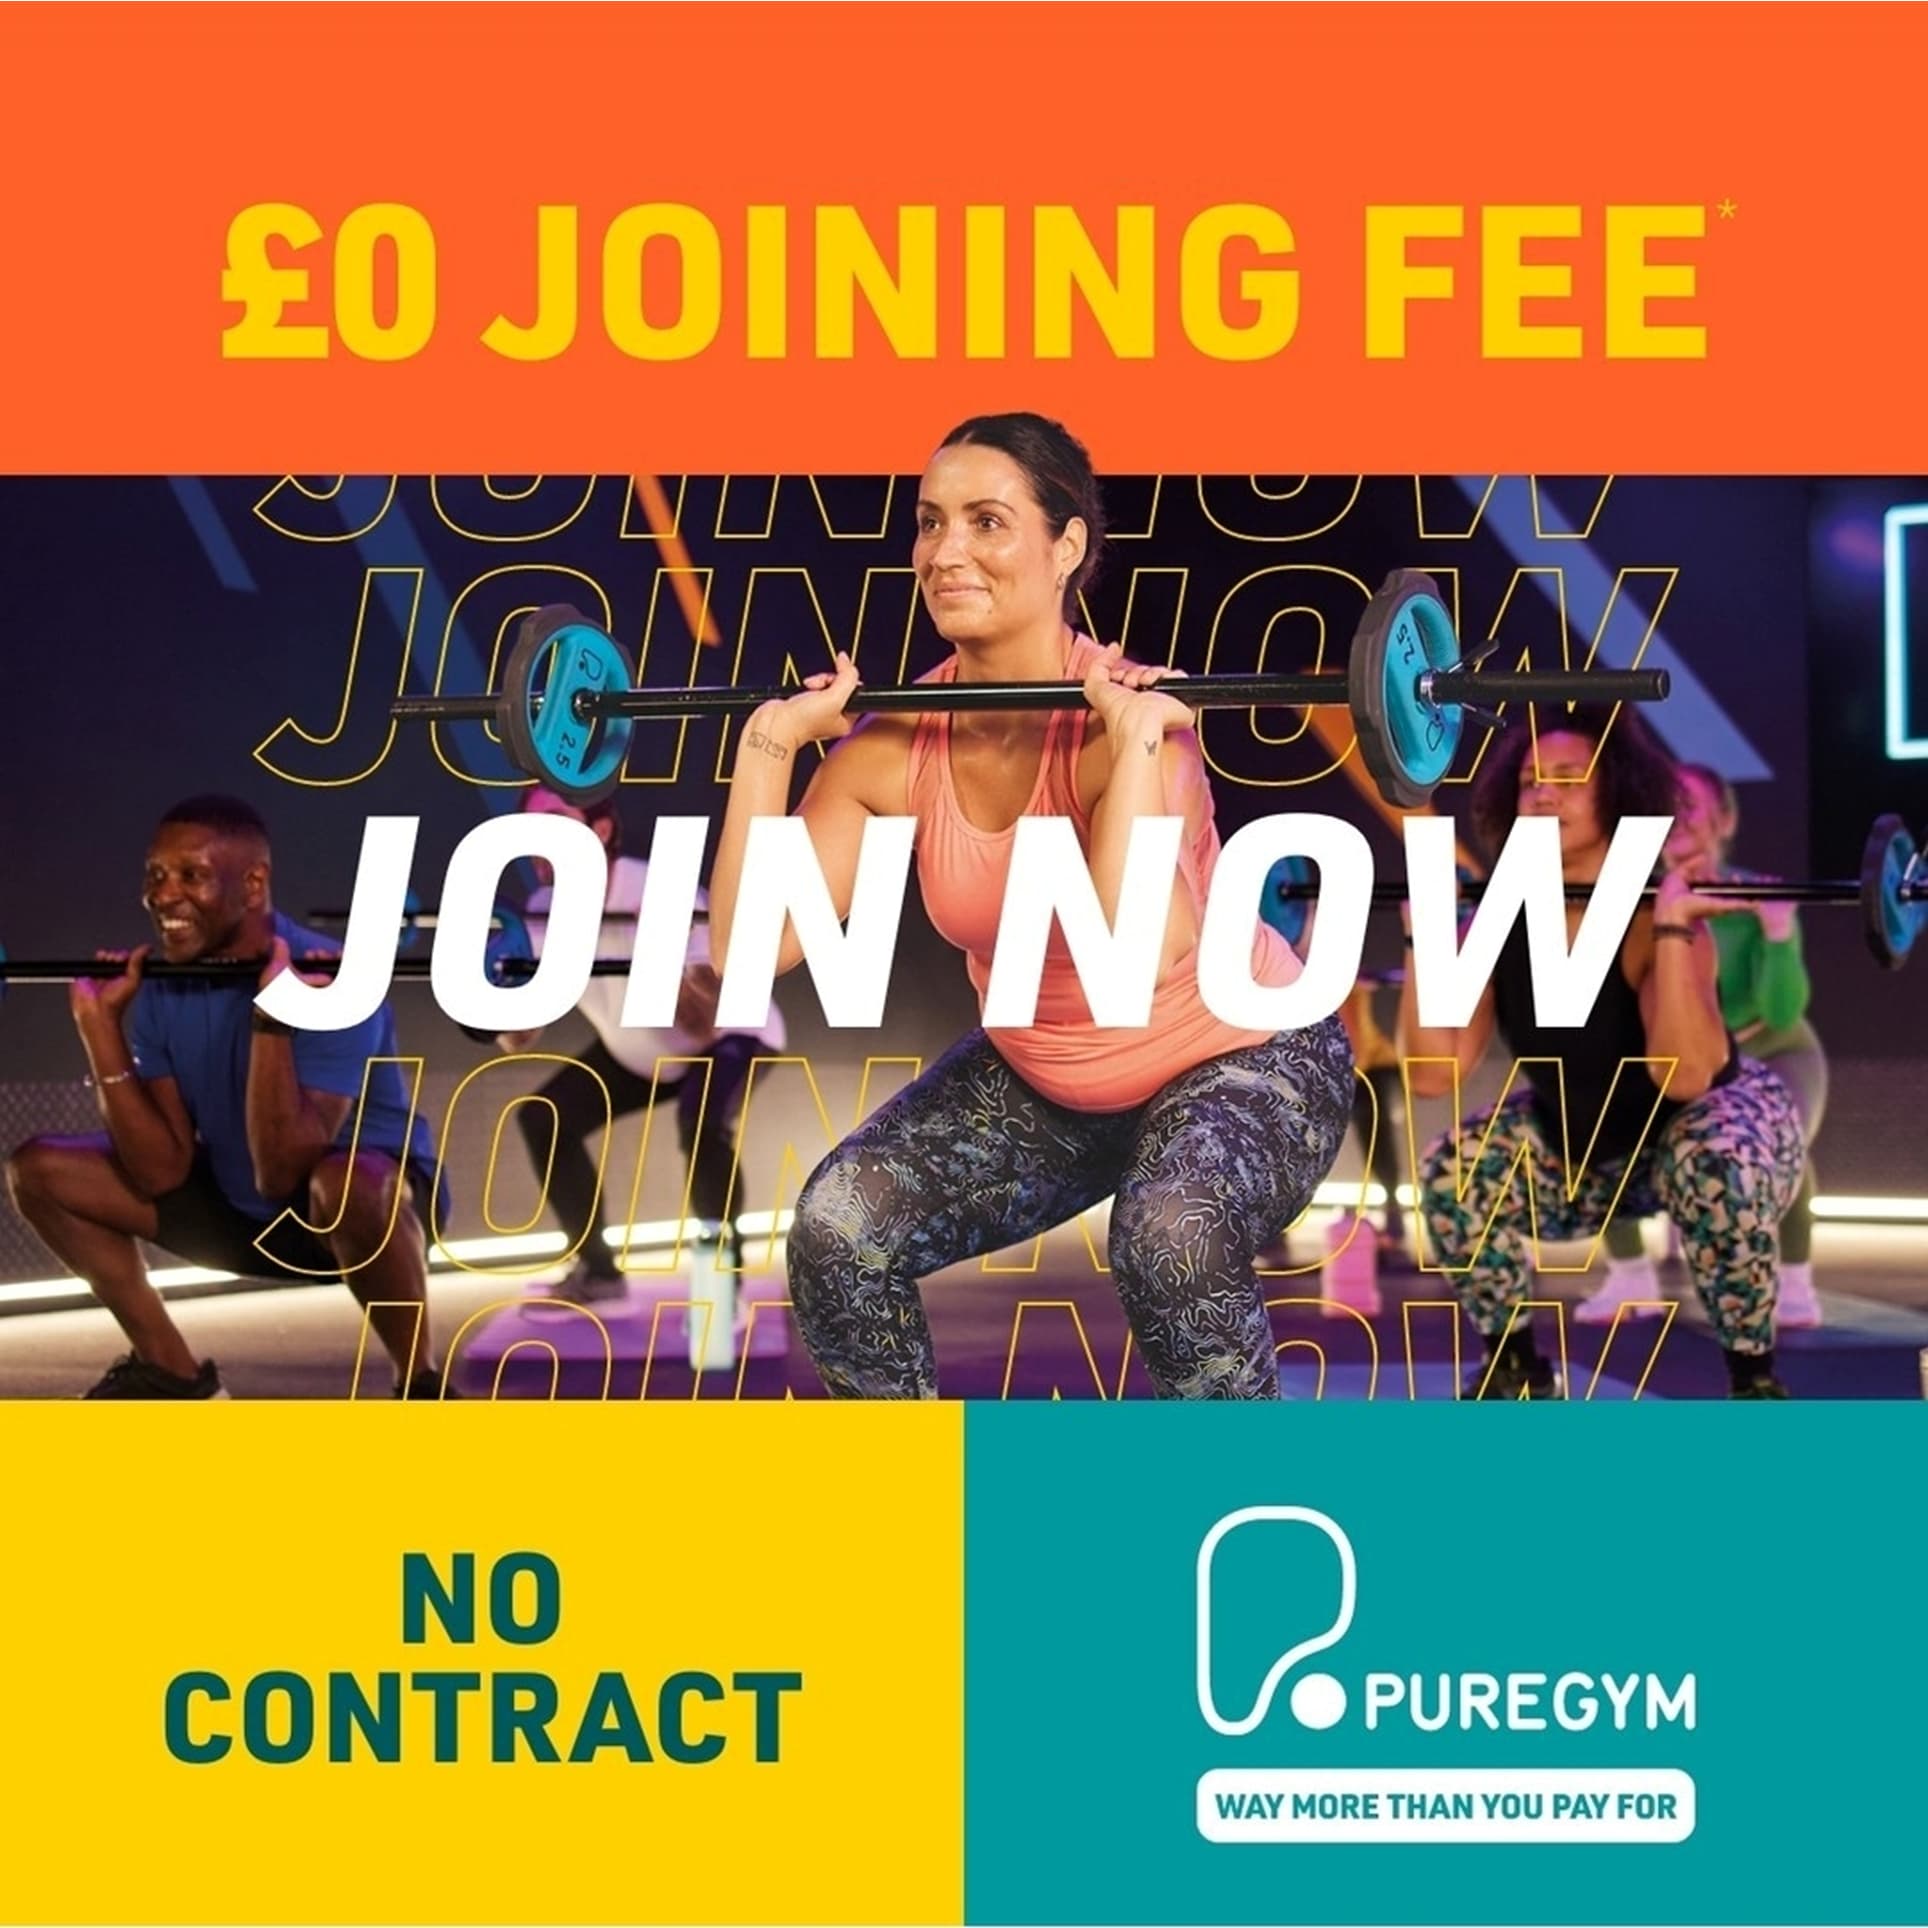 £0 JOINING FEE